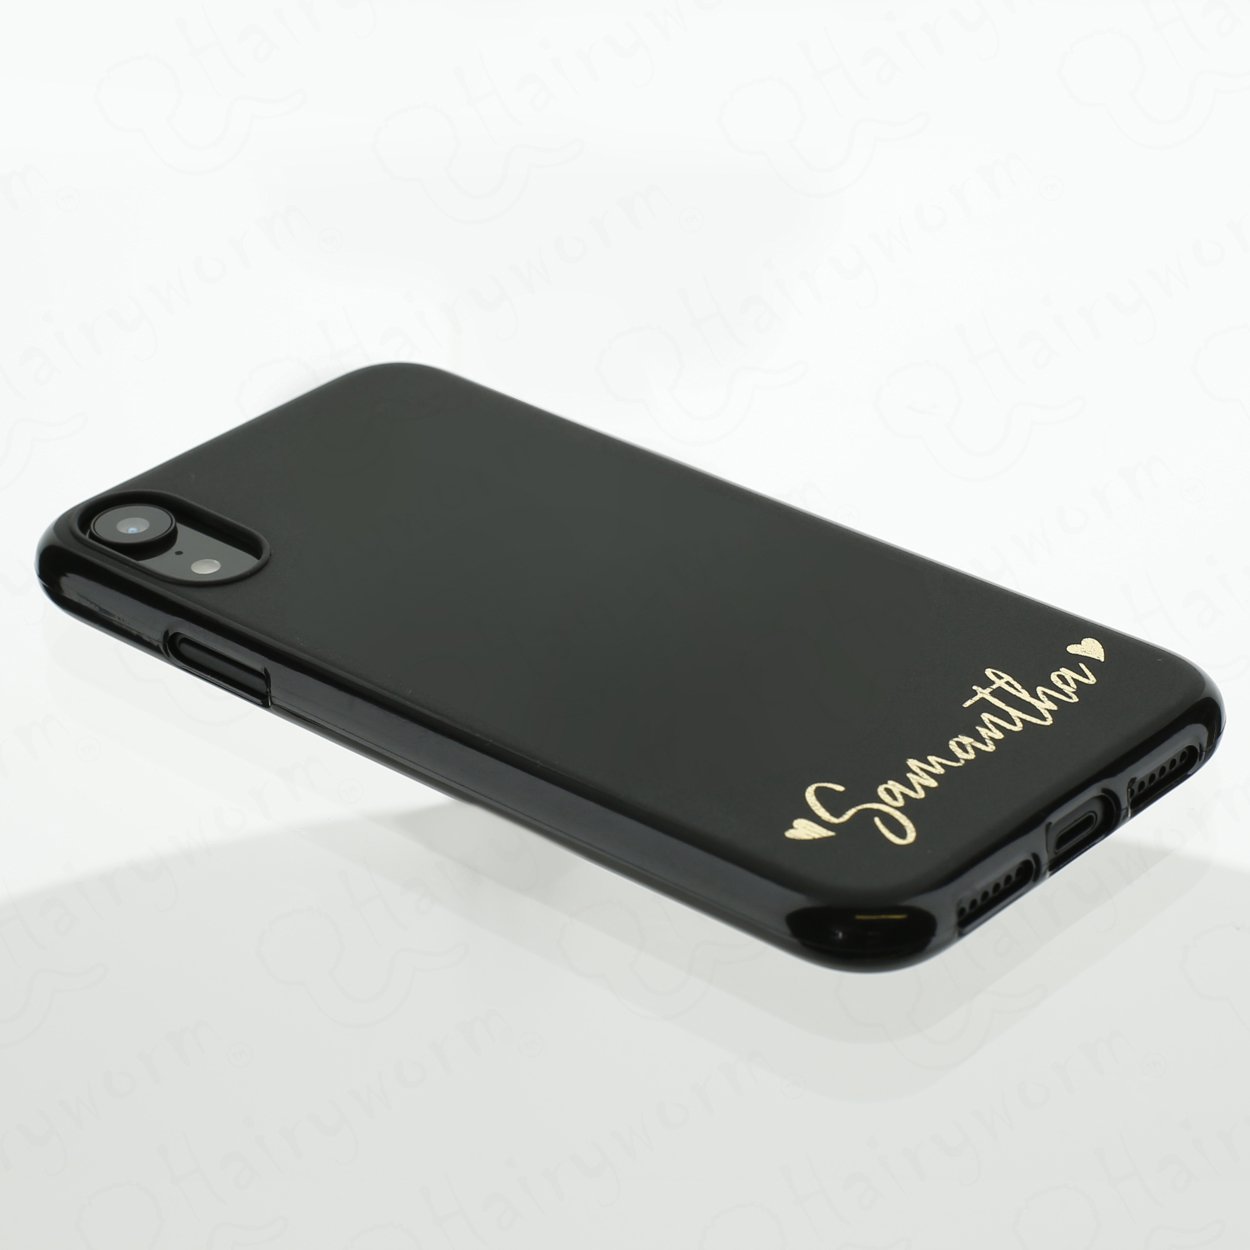 Personalised Nokia Phone Gel Case with Classic Initials Under Brush Stroke Heart